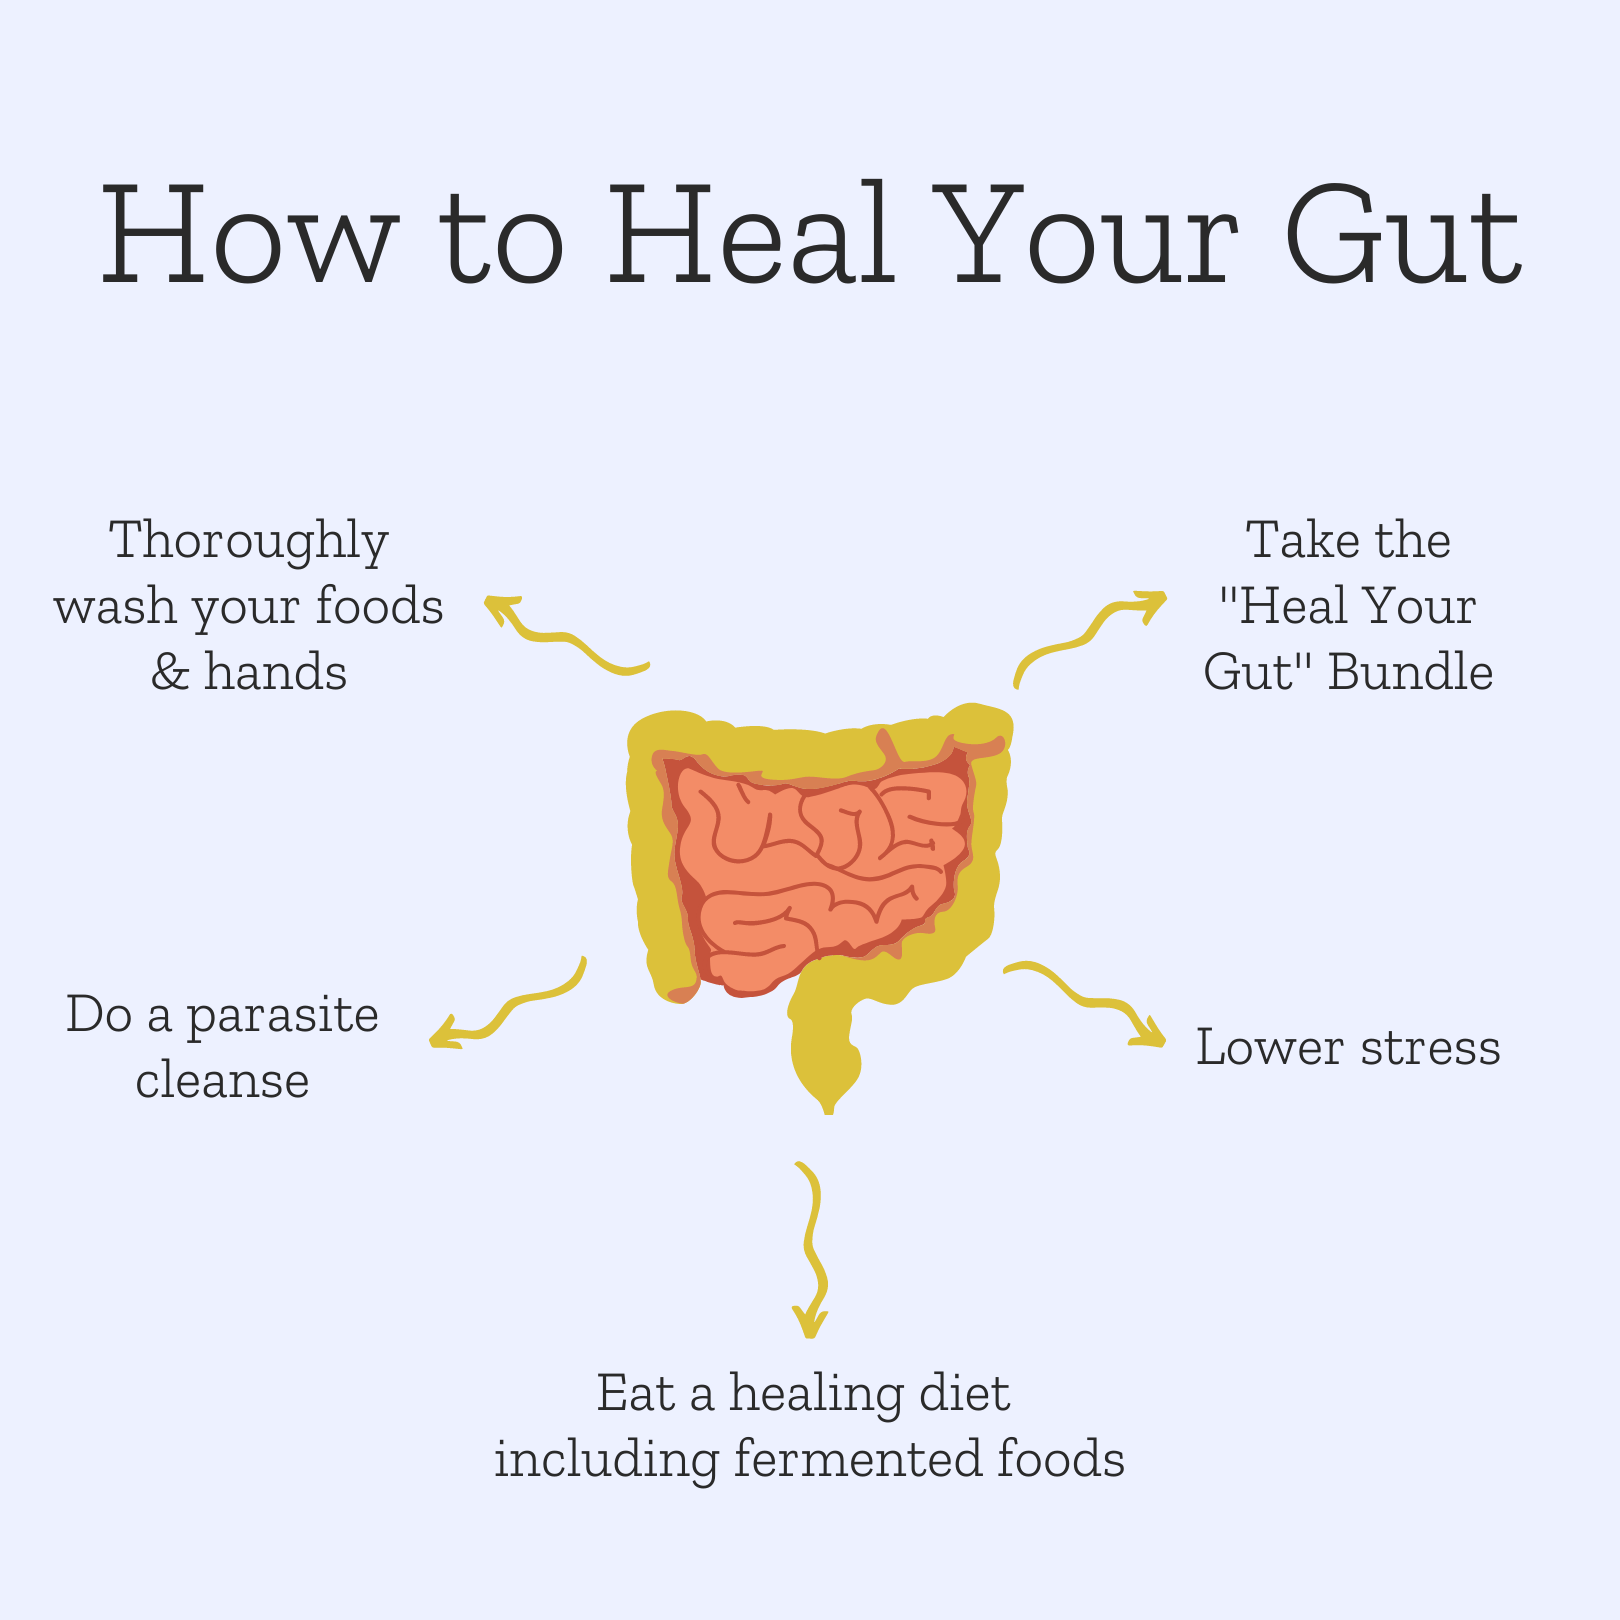 How to Heal Your Gut